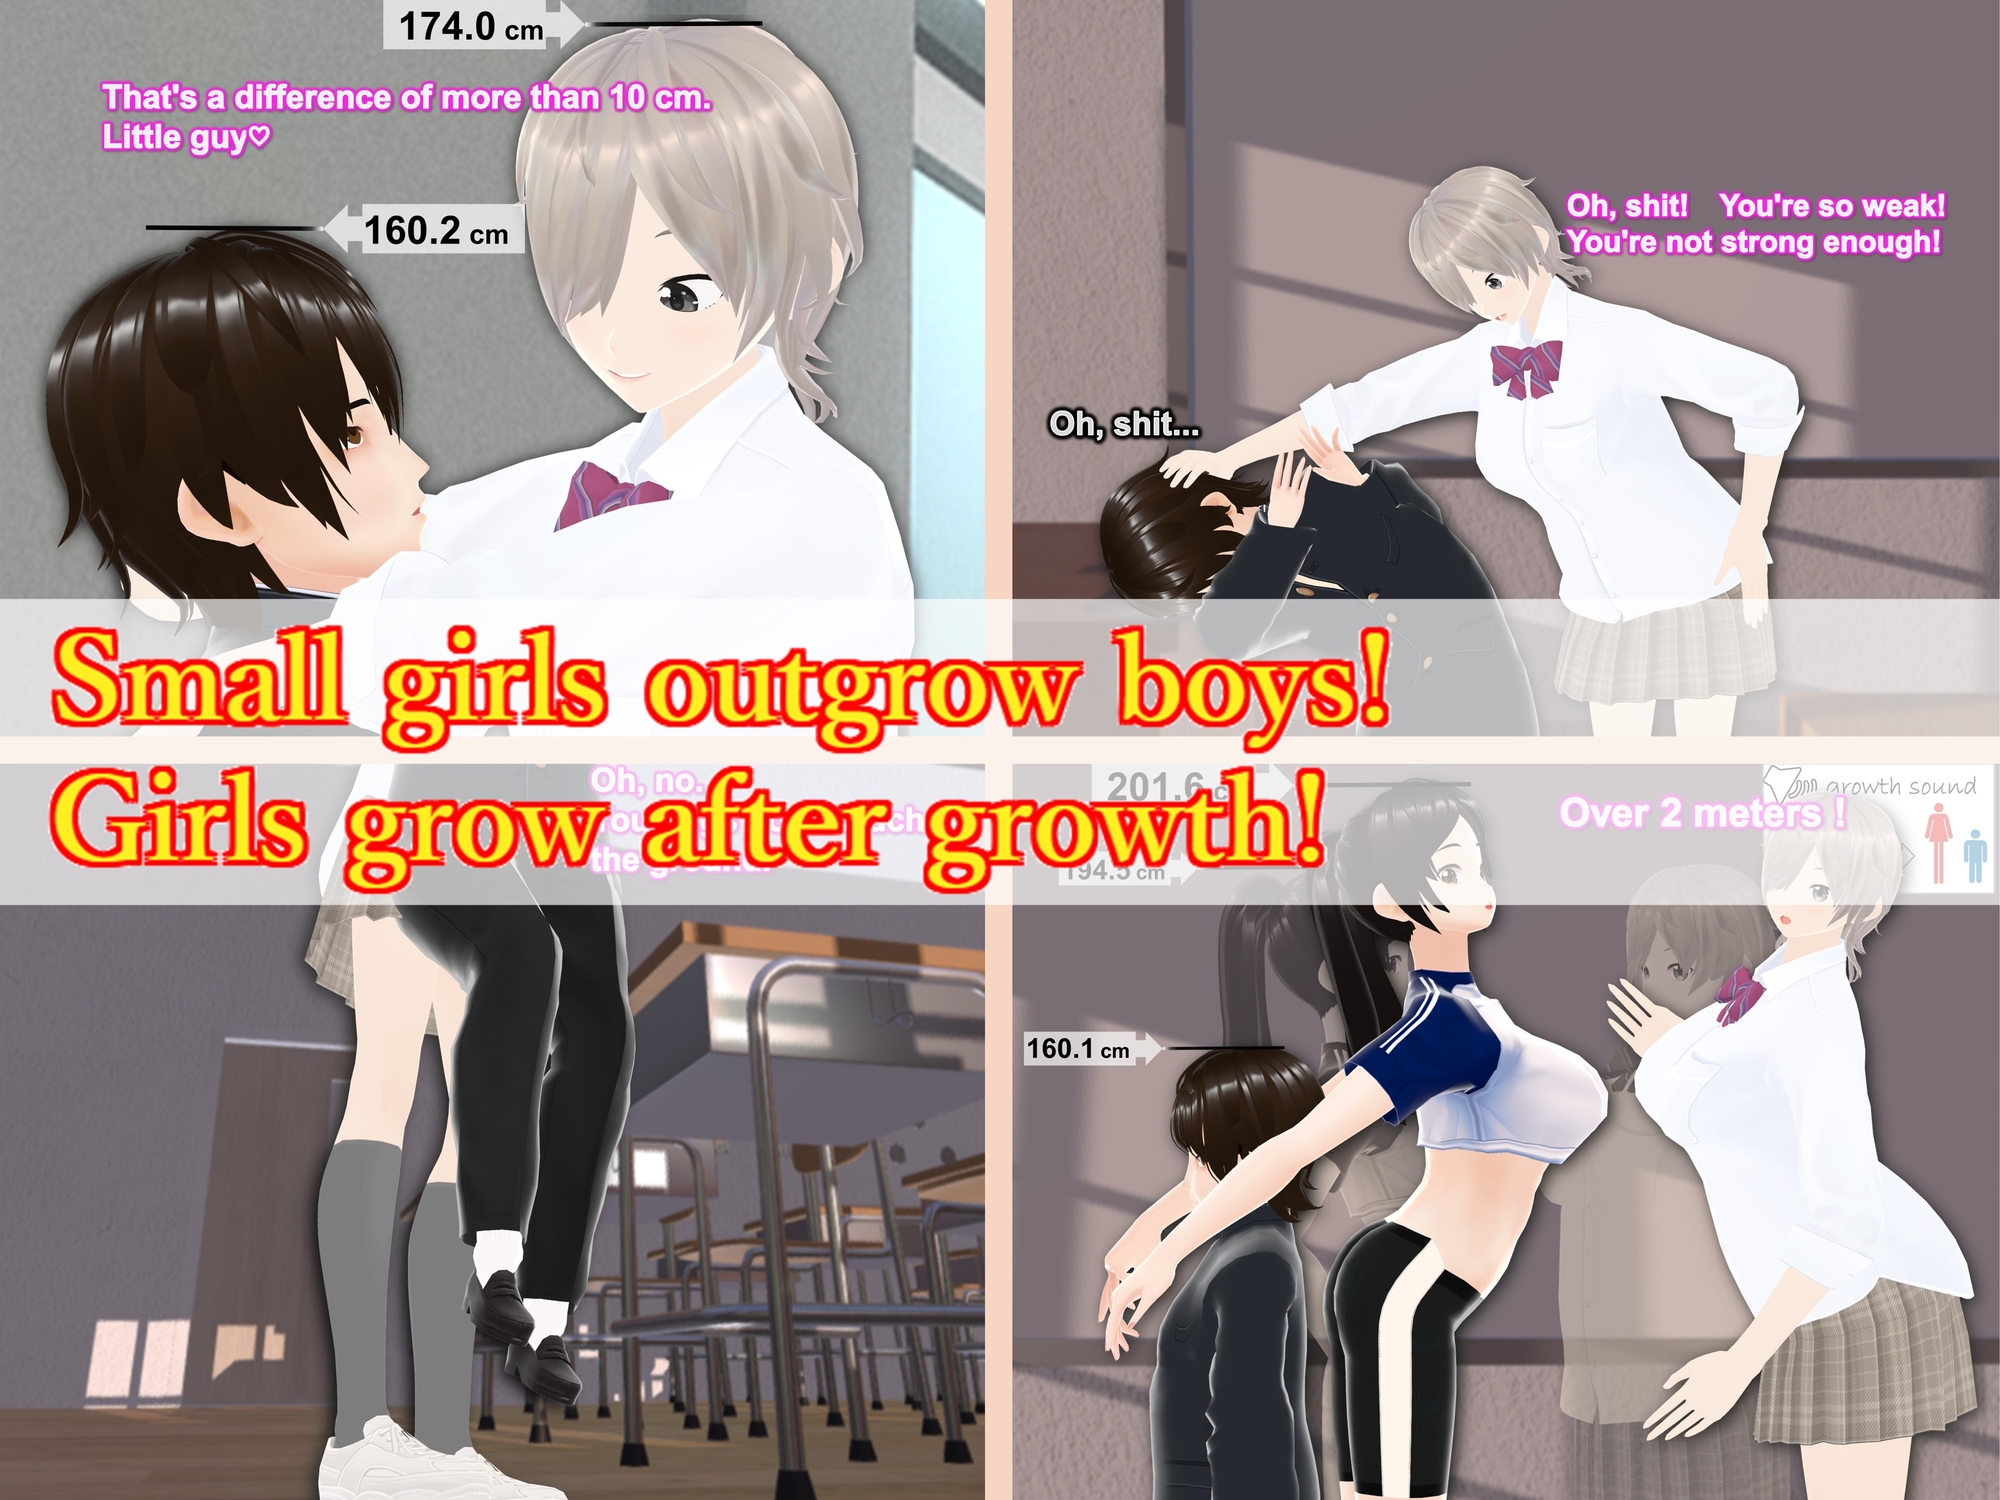 Outgrowing only girls, Overtake boys, Growth sound. Bullied girl Arc